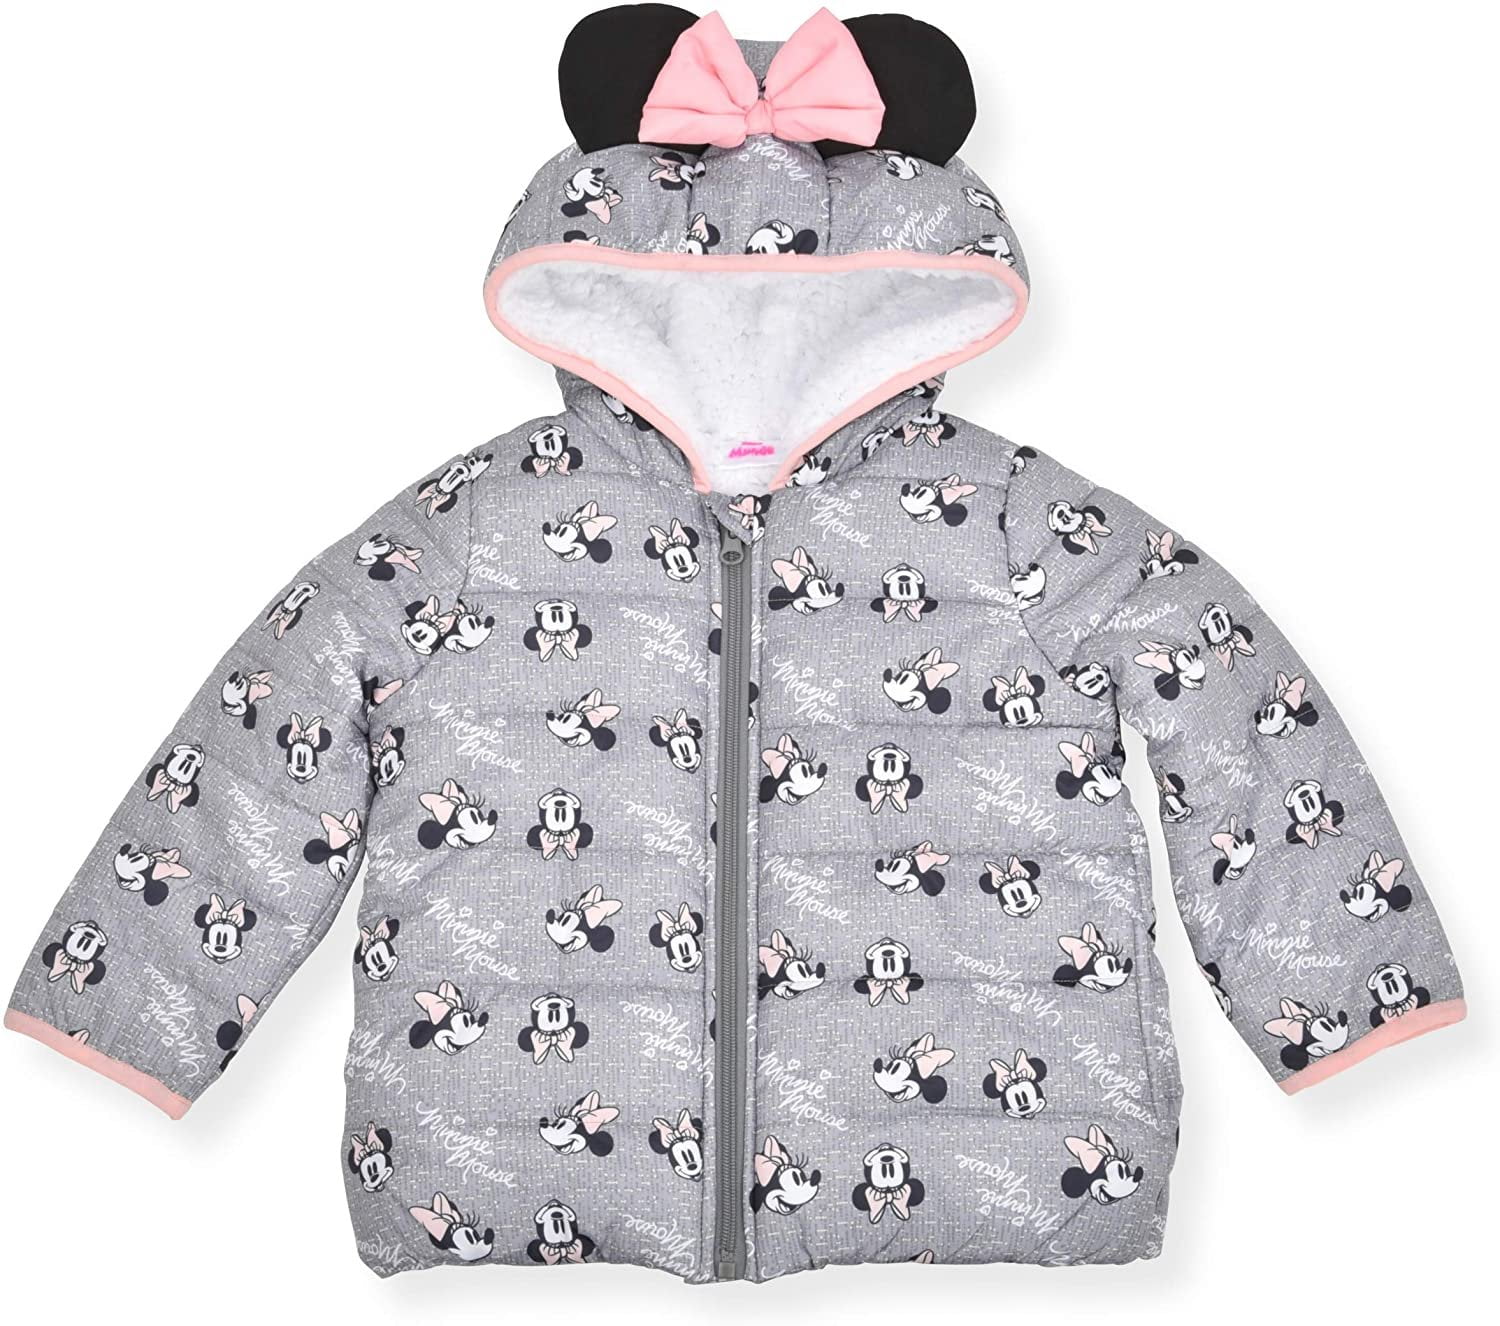 Minnie Mouse Pink/Red Girls Warm Comfy Zip up Fleece Jacket Top Coat Age from 6 to 12 Childrens Kids 